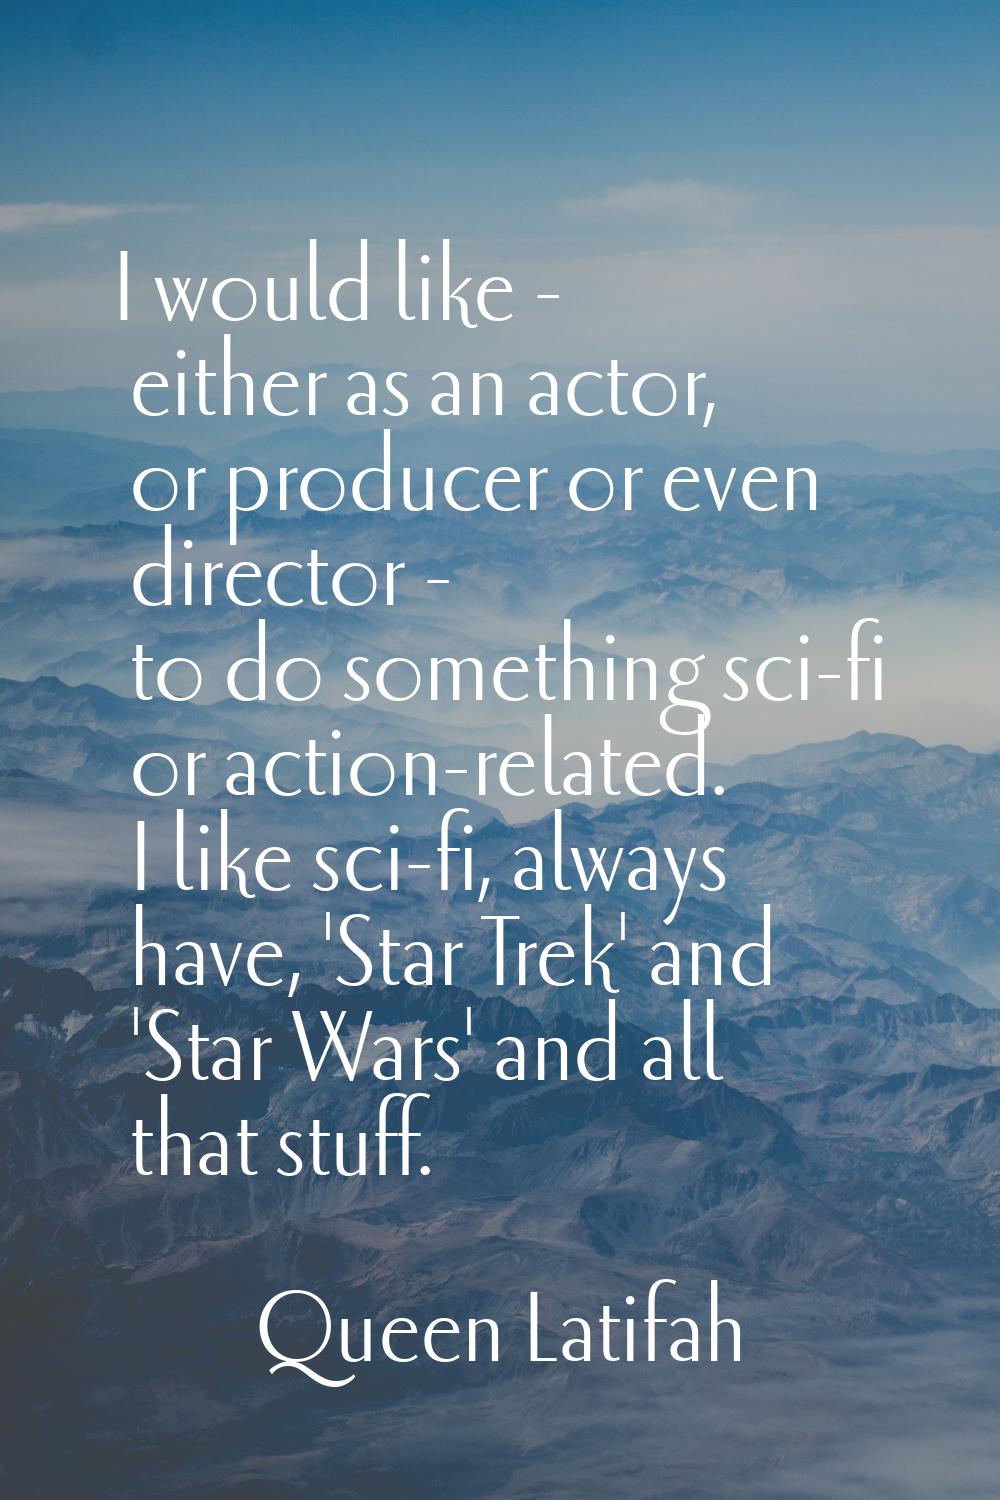 I would like - either as an actor, or producer or even director - to do something sci-fi or action-